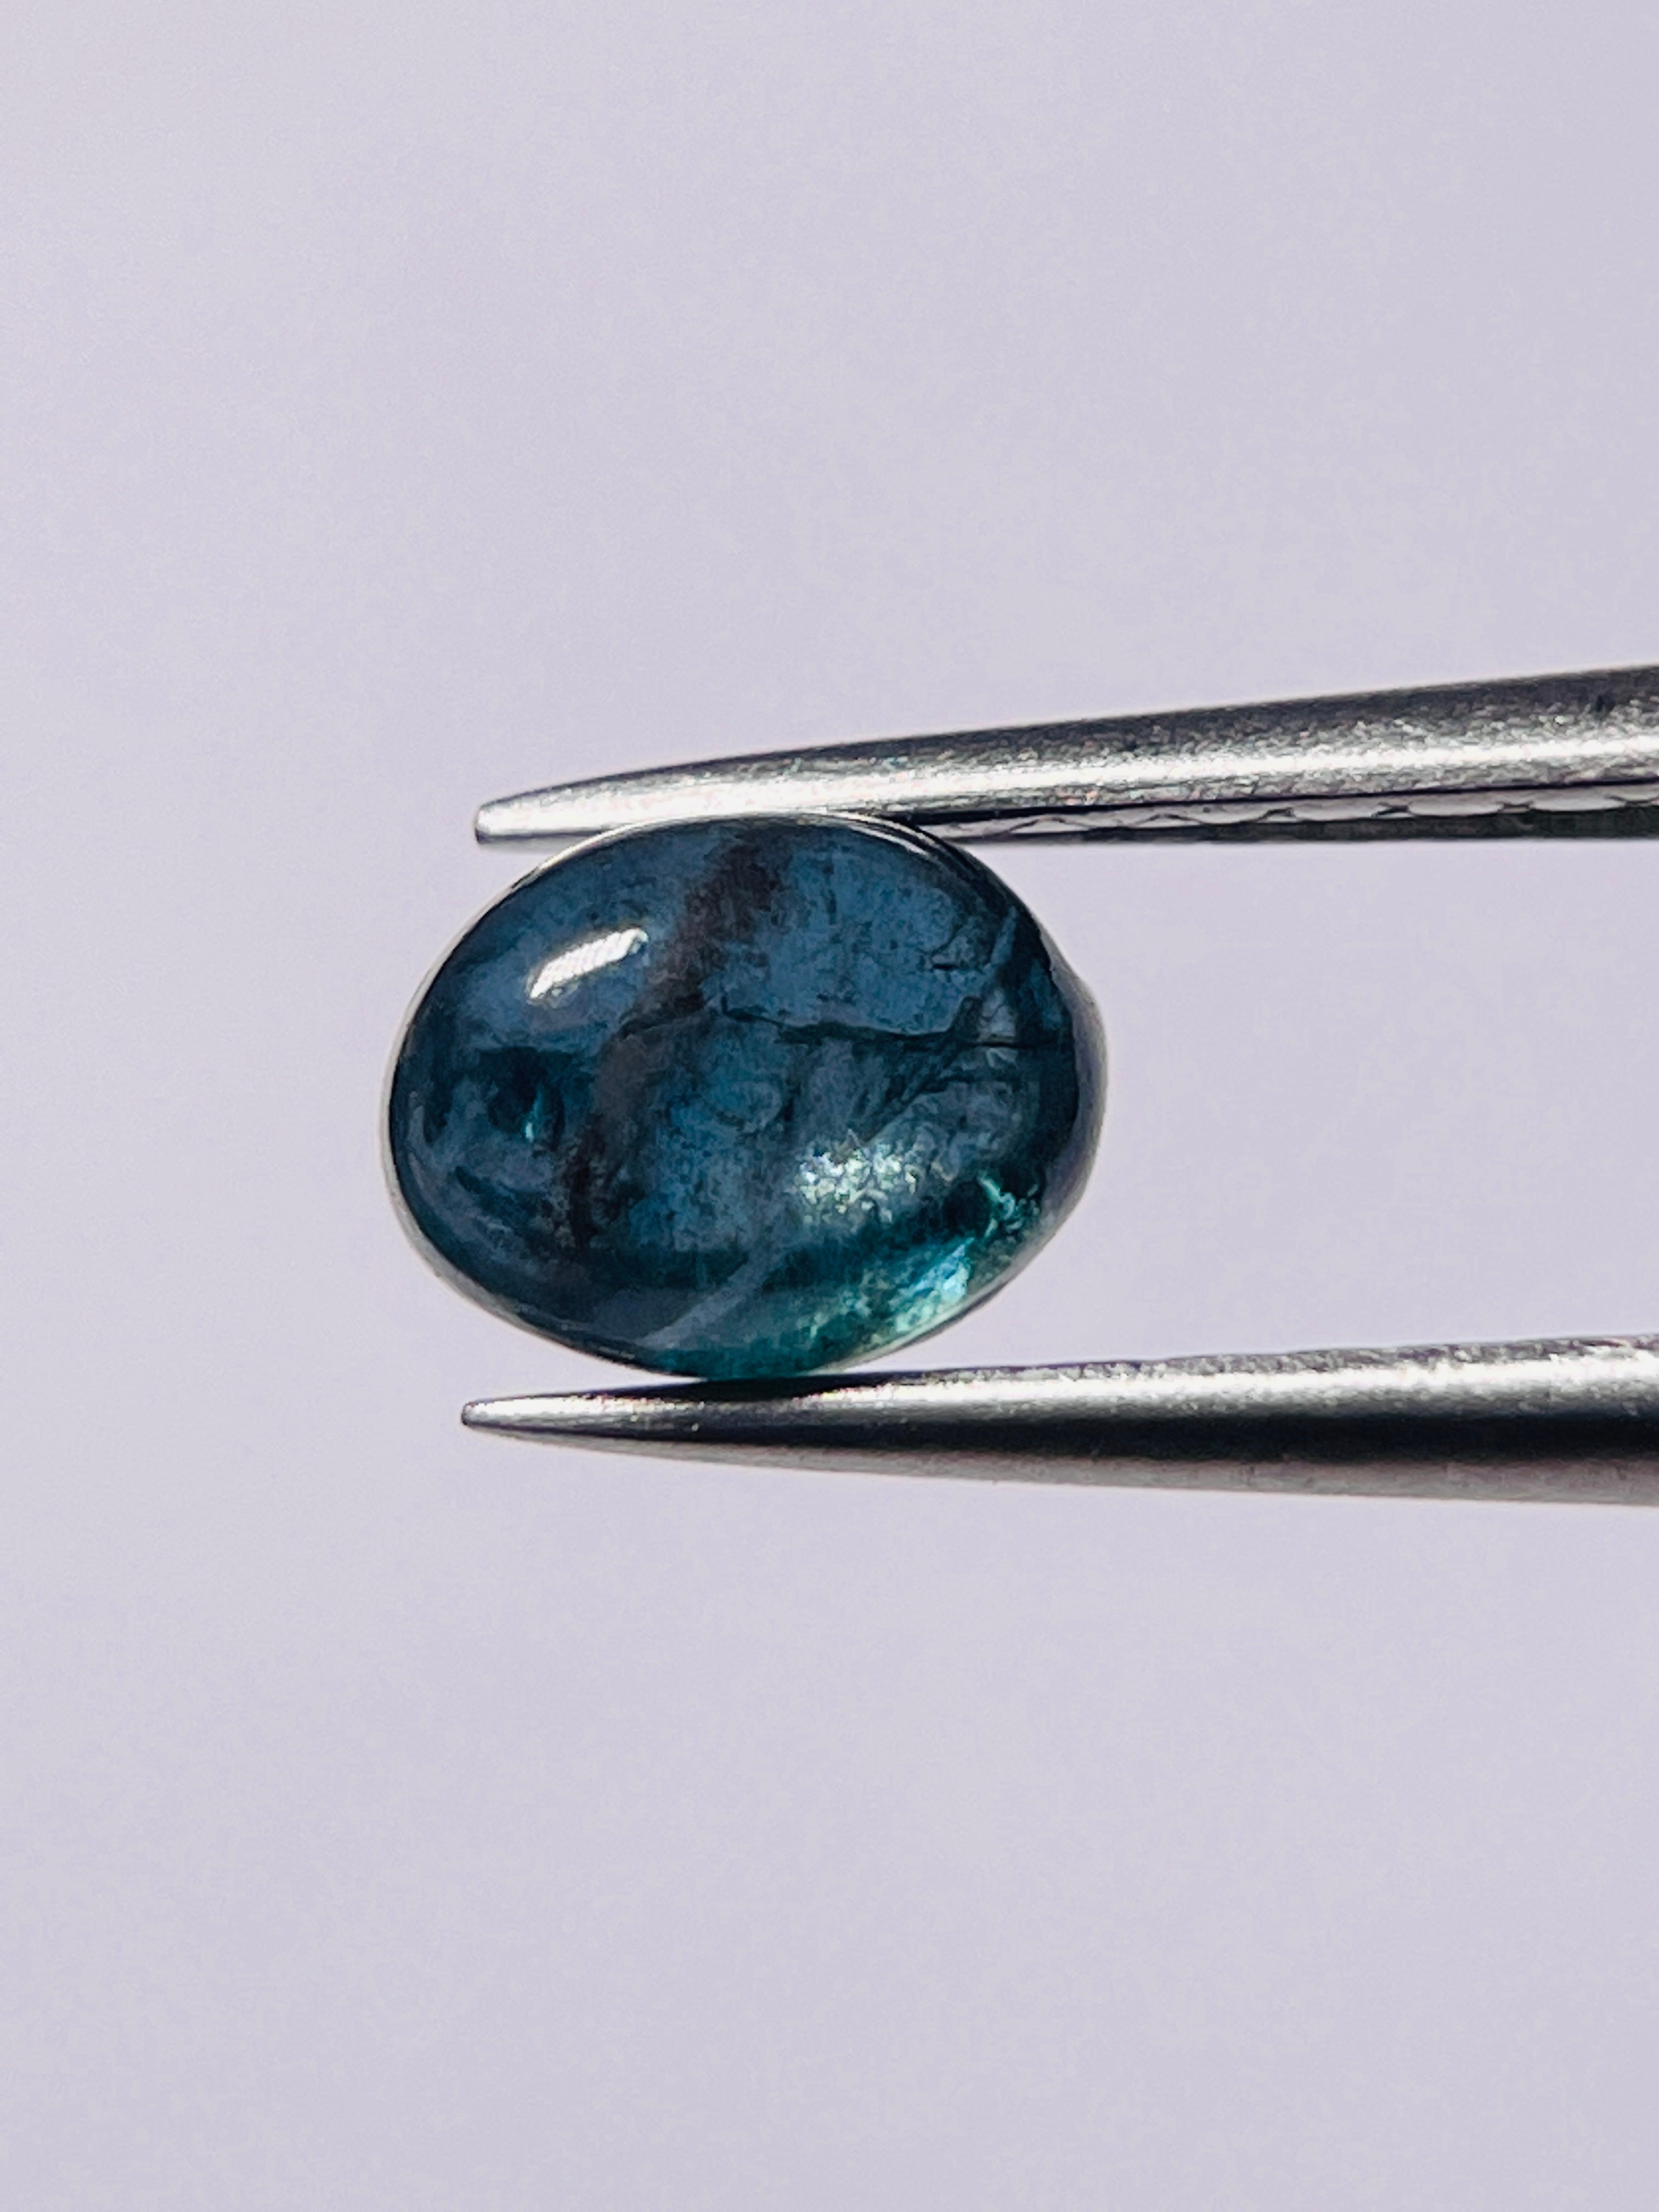 1.30Ct Sapphire Cabochon Seems To Have A Moving Star But As Point Umba Valley Tanzania. Untreated